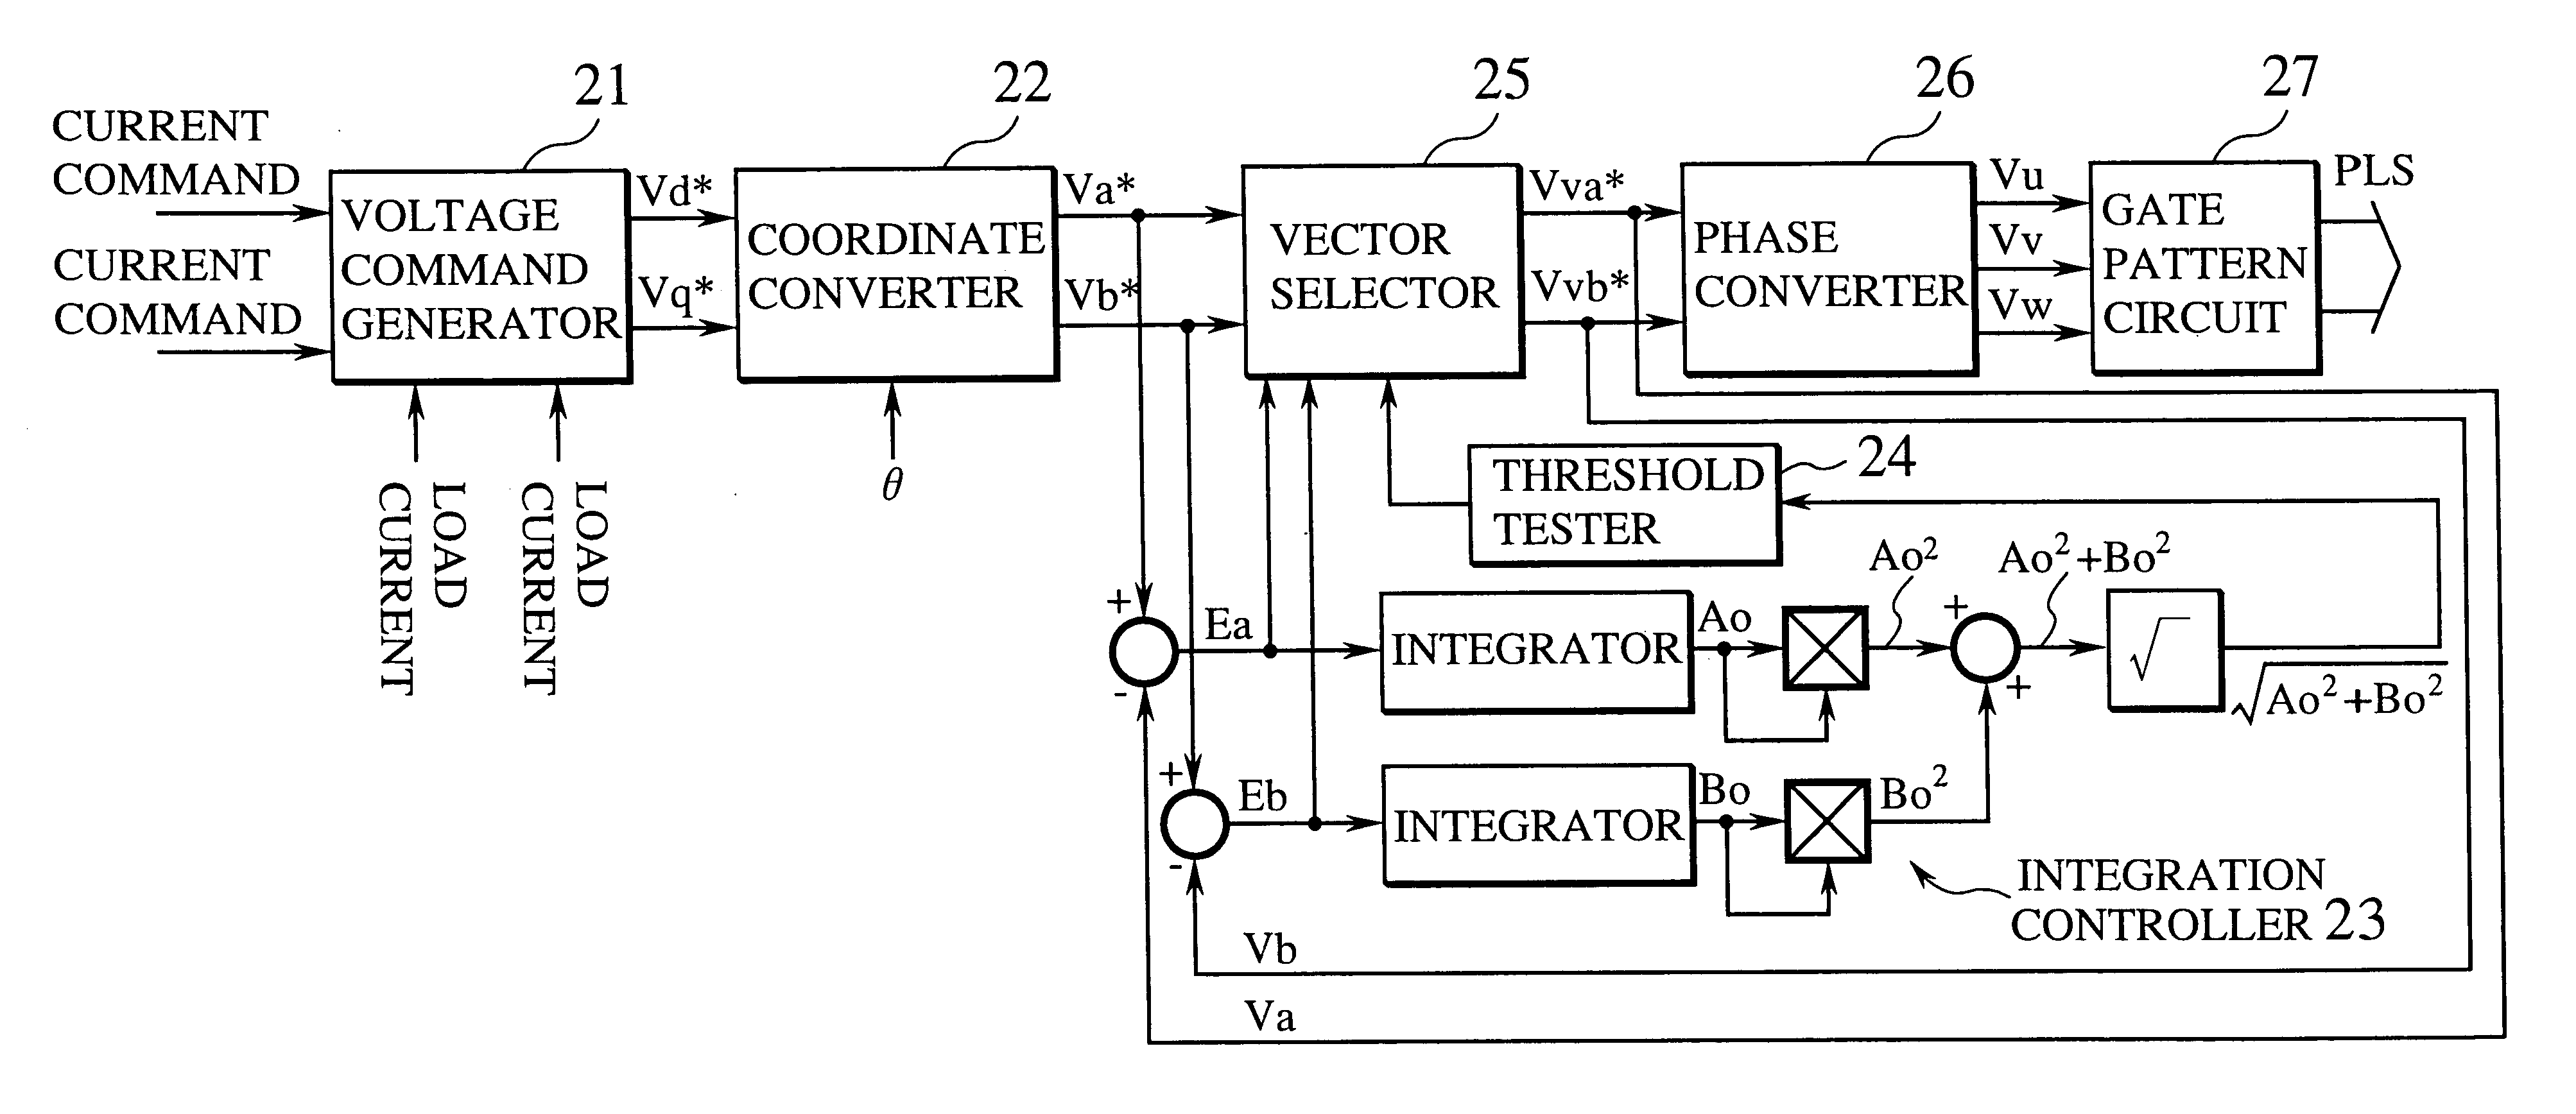 Power converting system multiplexed with voltage dividing transformers, the voltage transformers, and controller for the system